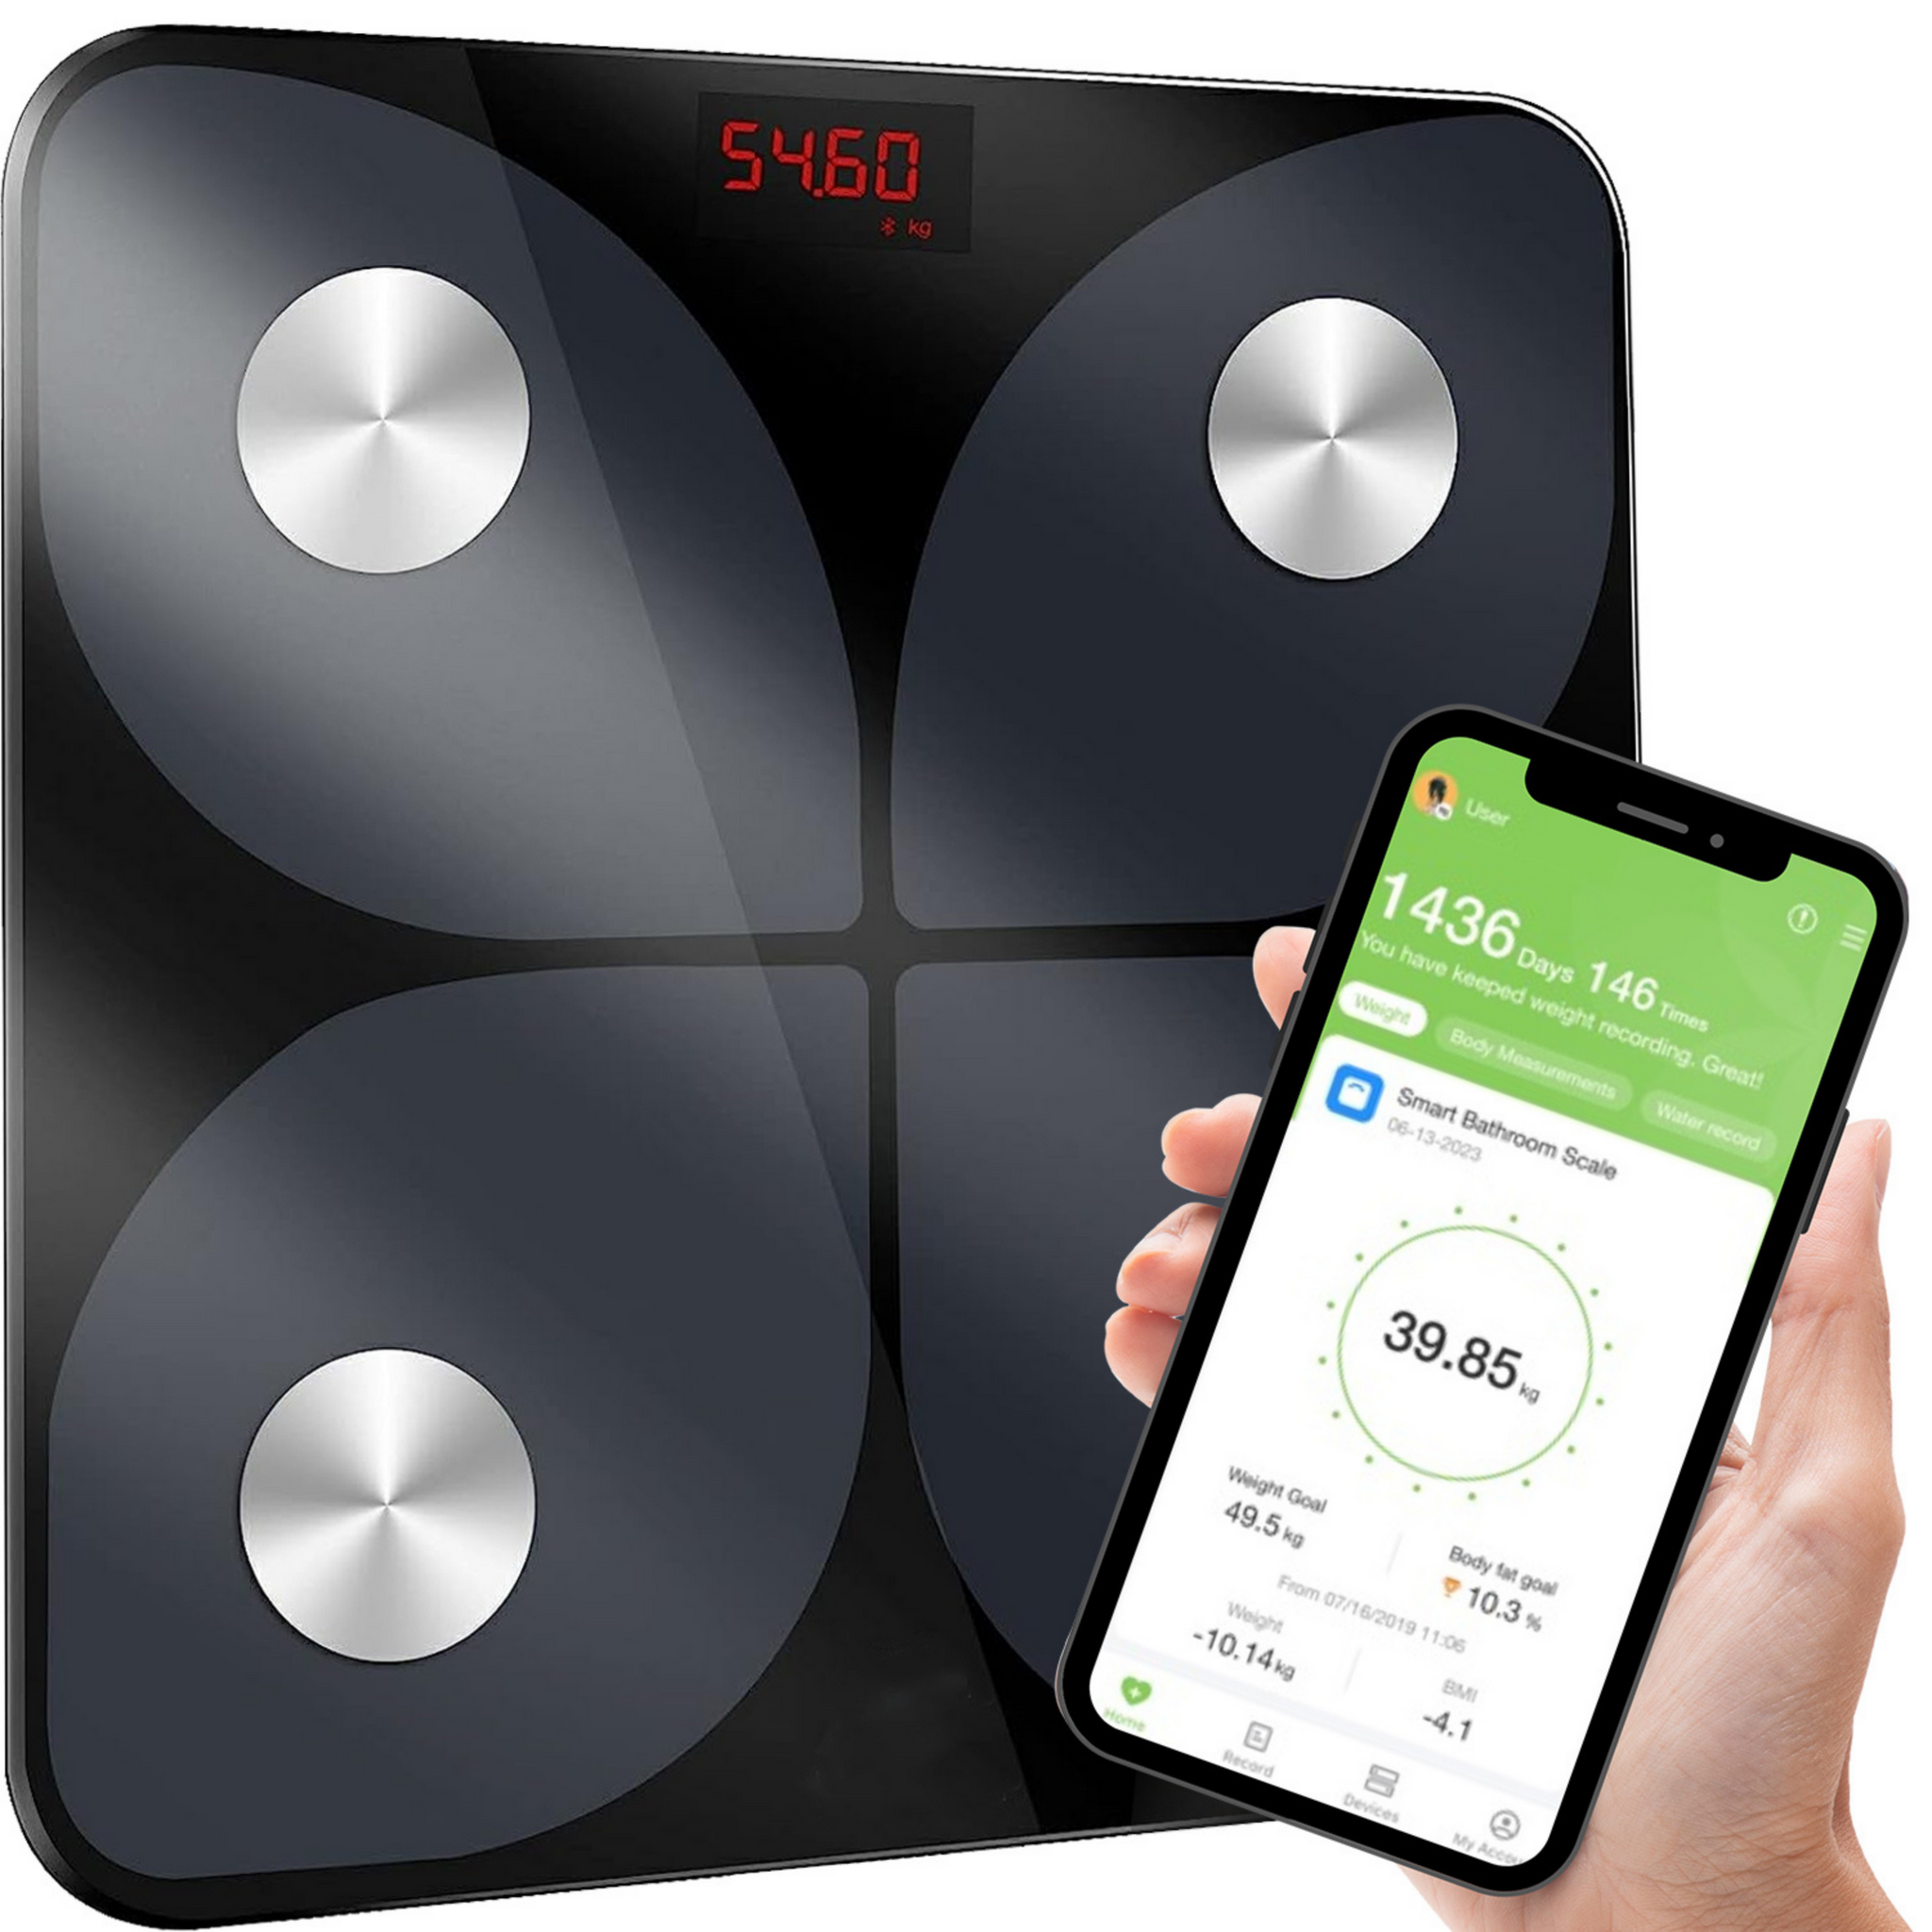 Bluetooth Smart Scale - Measures Body Fat, BMI, Muscle Mass And More